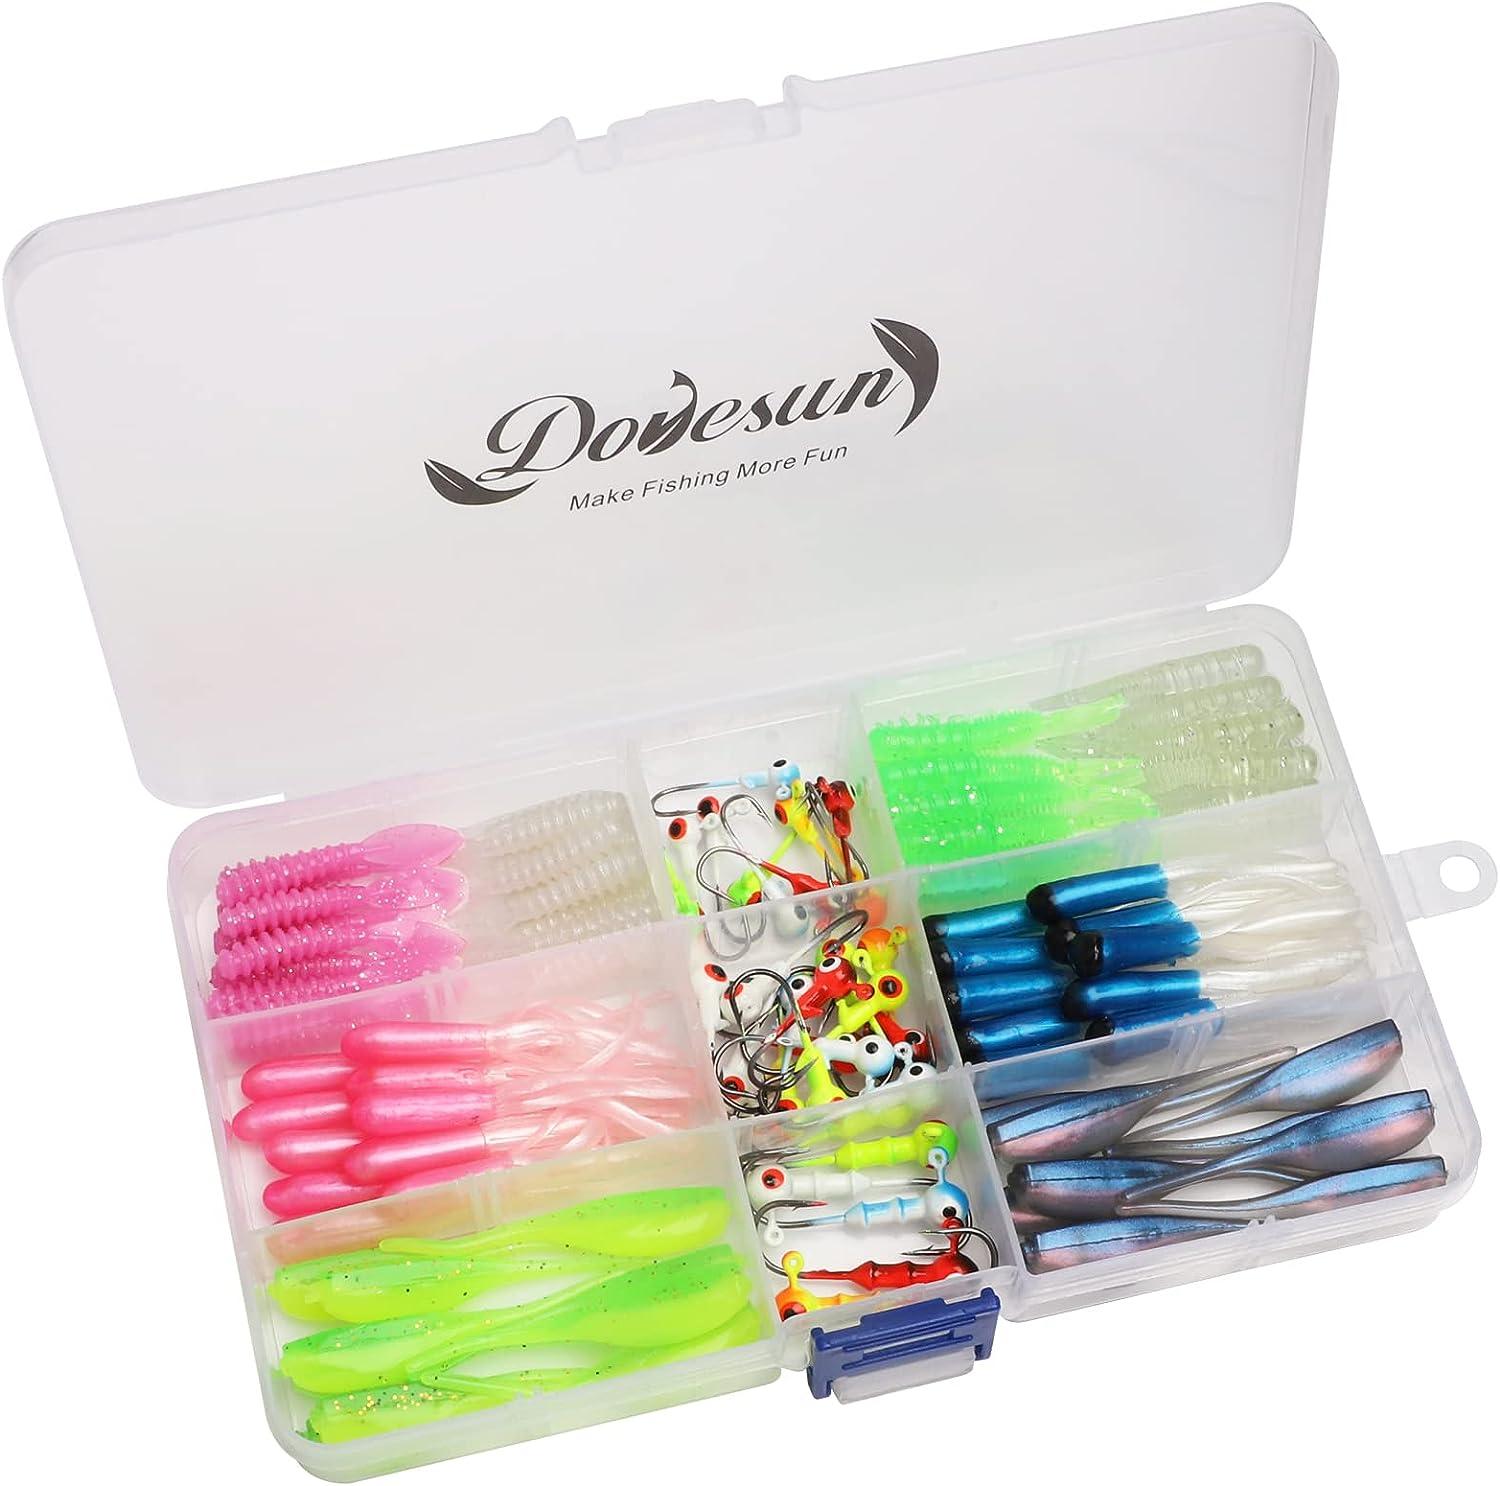 Comprar Dovesun Fishing Soft Plastic Lures Kit 15Pcs, Pre-Rigged Jig Head  Soft Swimbait for Bass Fishing 5/7oz 3/8oz 2/5oz Paddle Tail Swimbaits 3  Types Lures for Catfish Trout Crappie Bass en USA